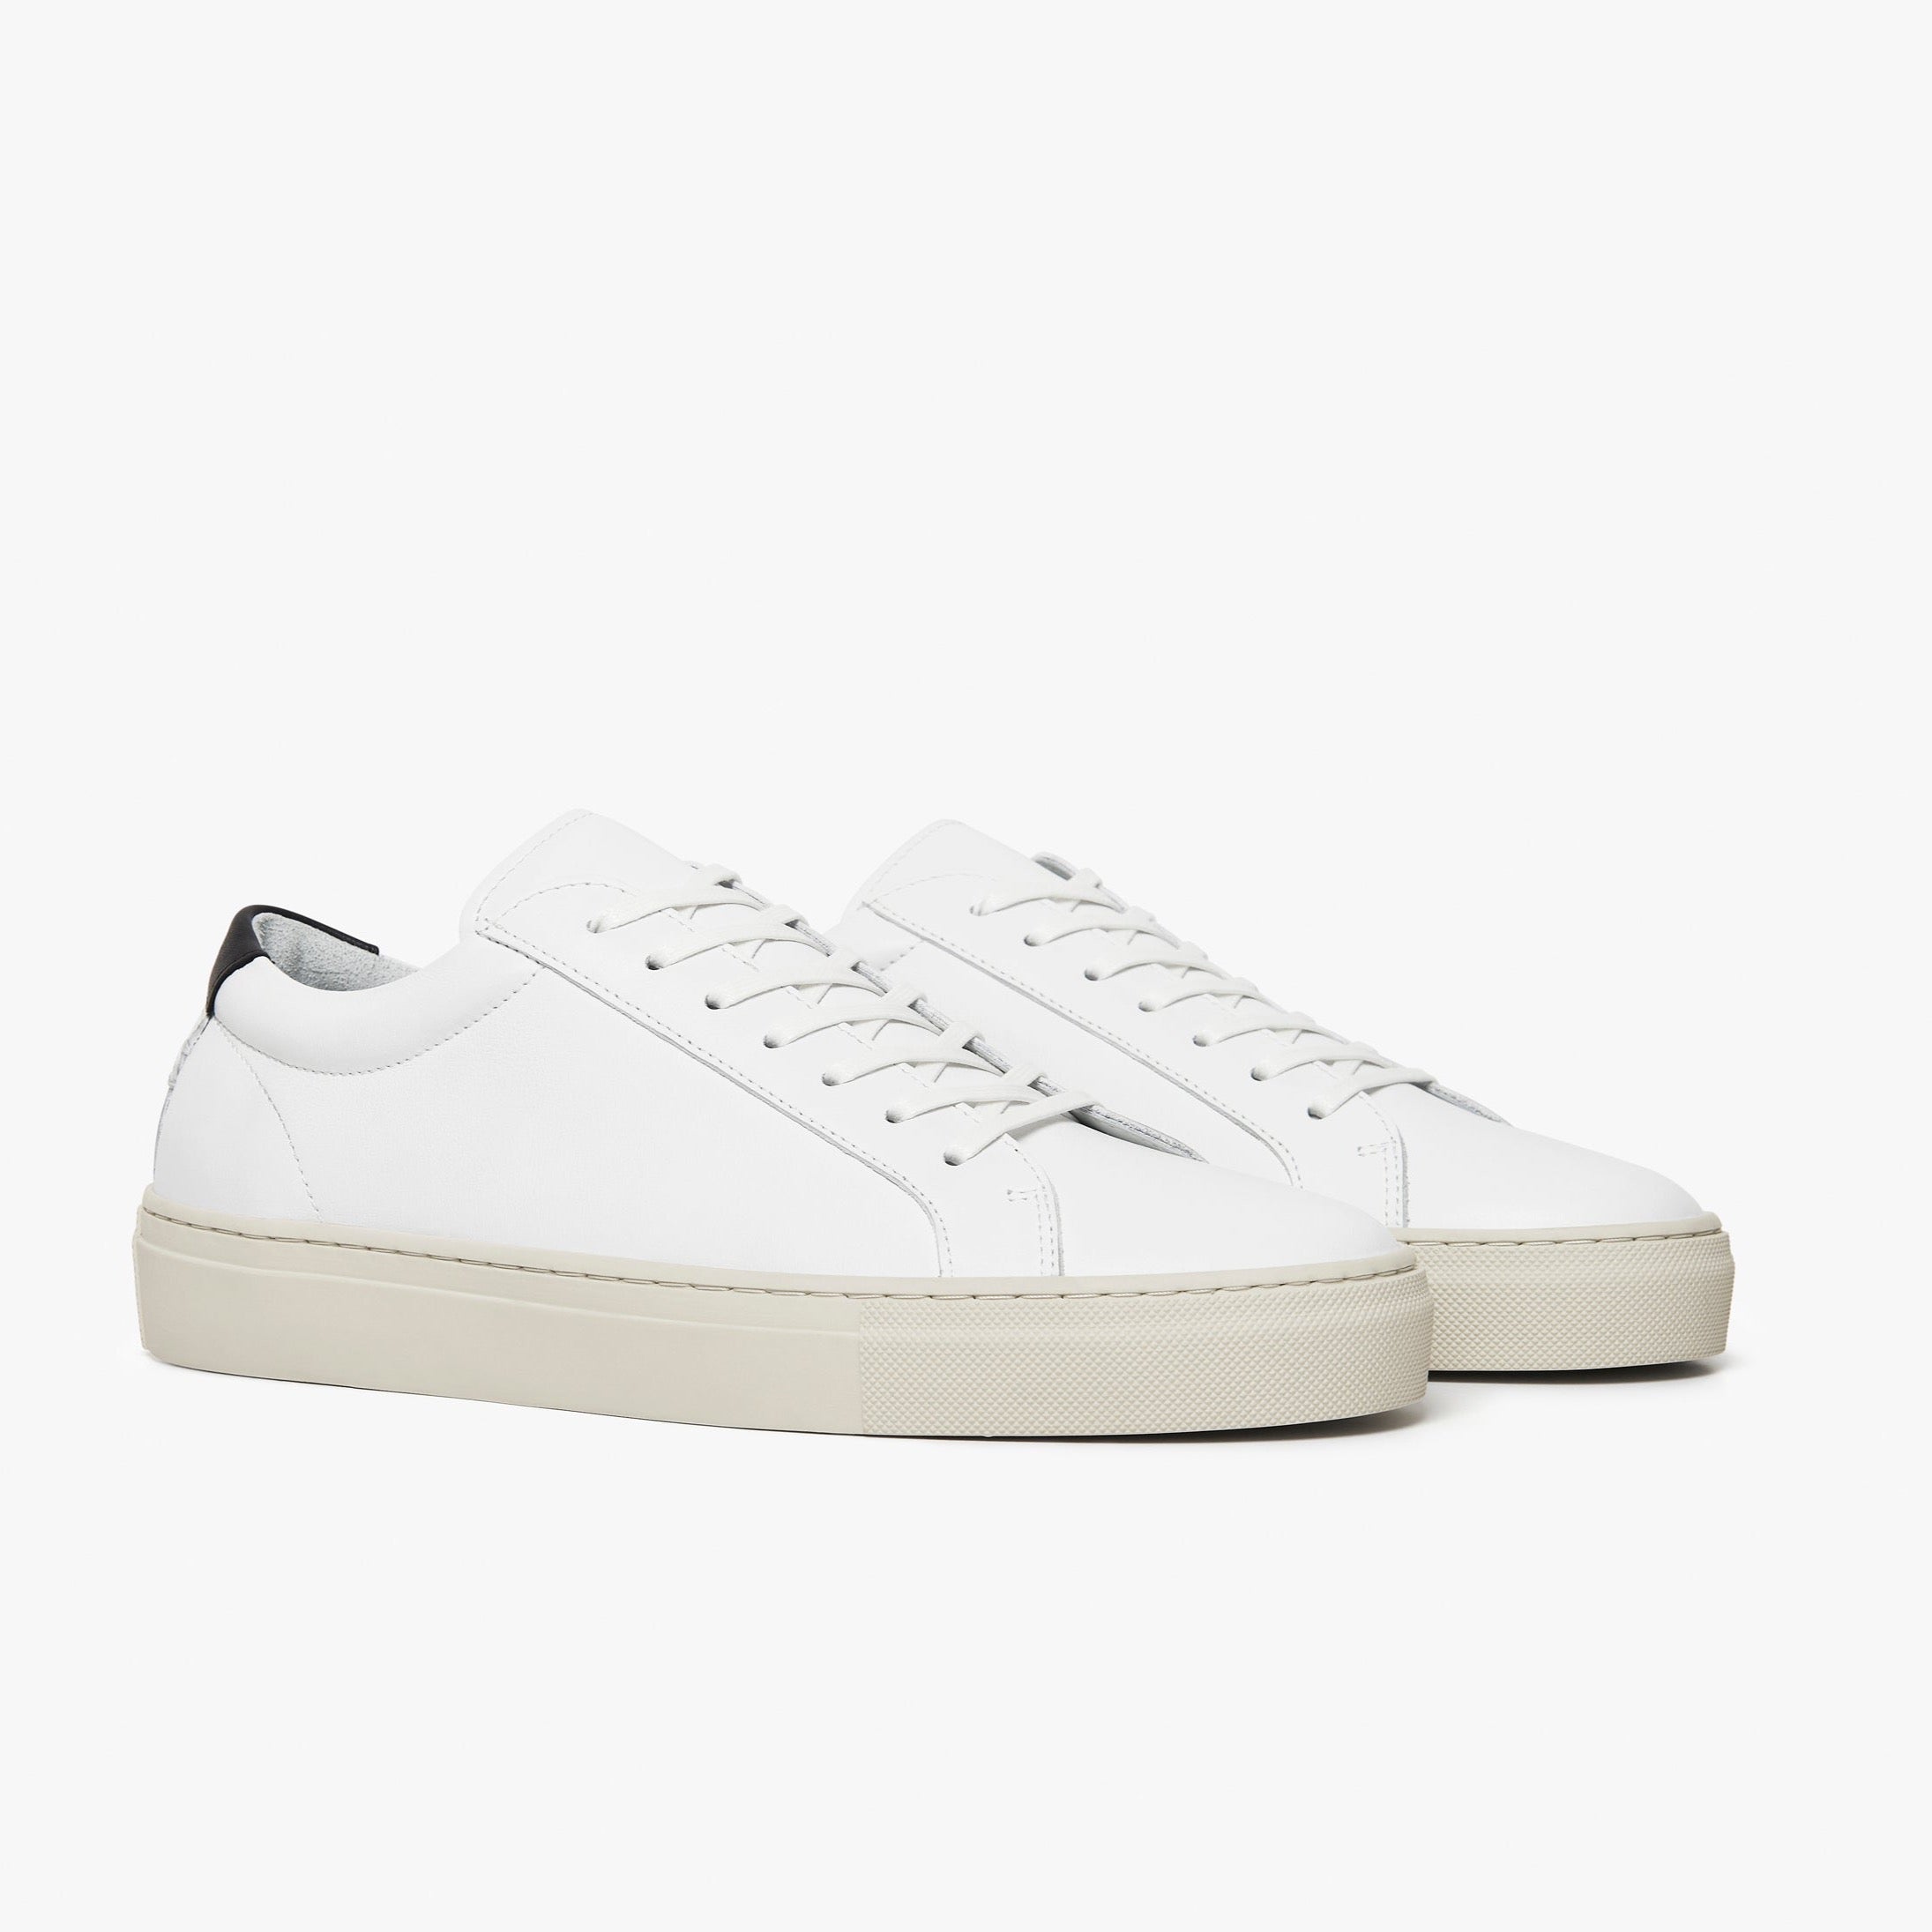 Buy Puma Urban Graphicster IDP White Sneakers from top Brands at Best  Prices Online in India | Tata CLiQ